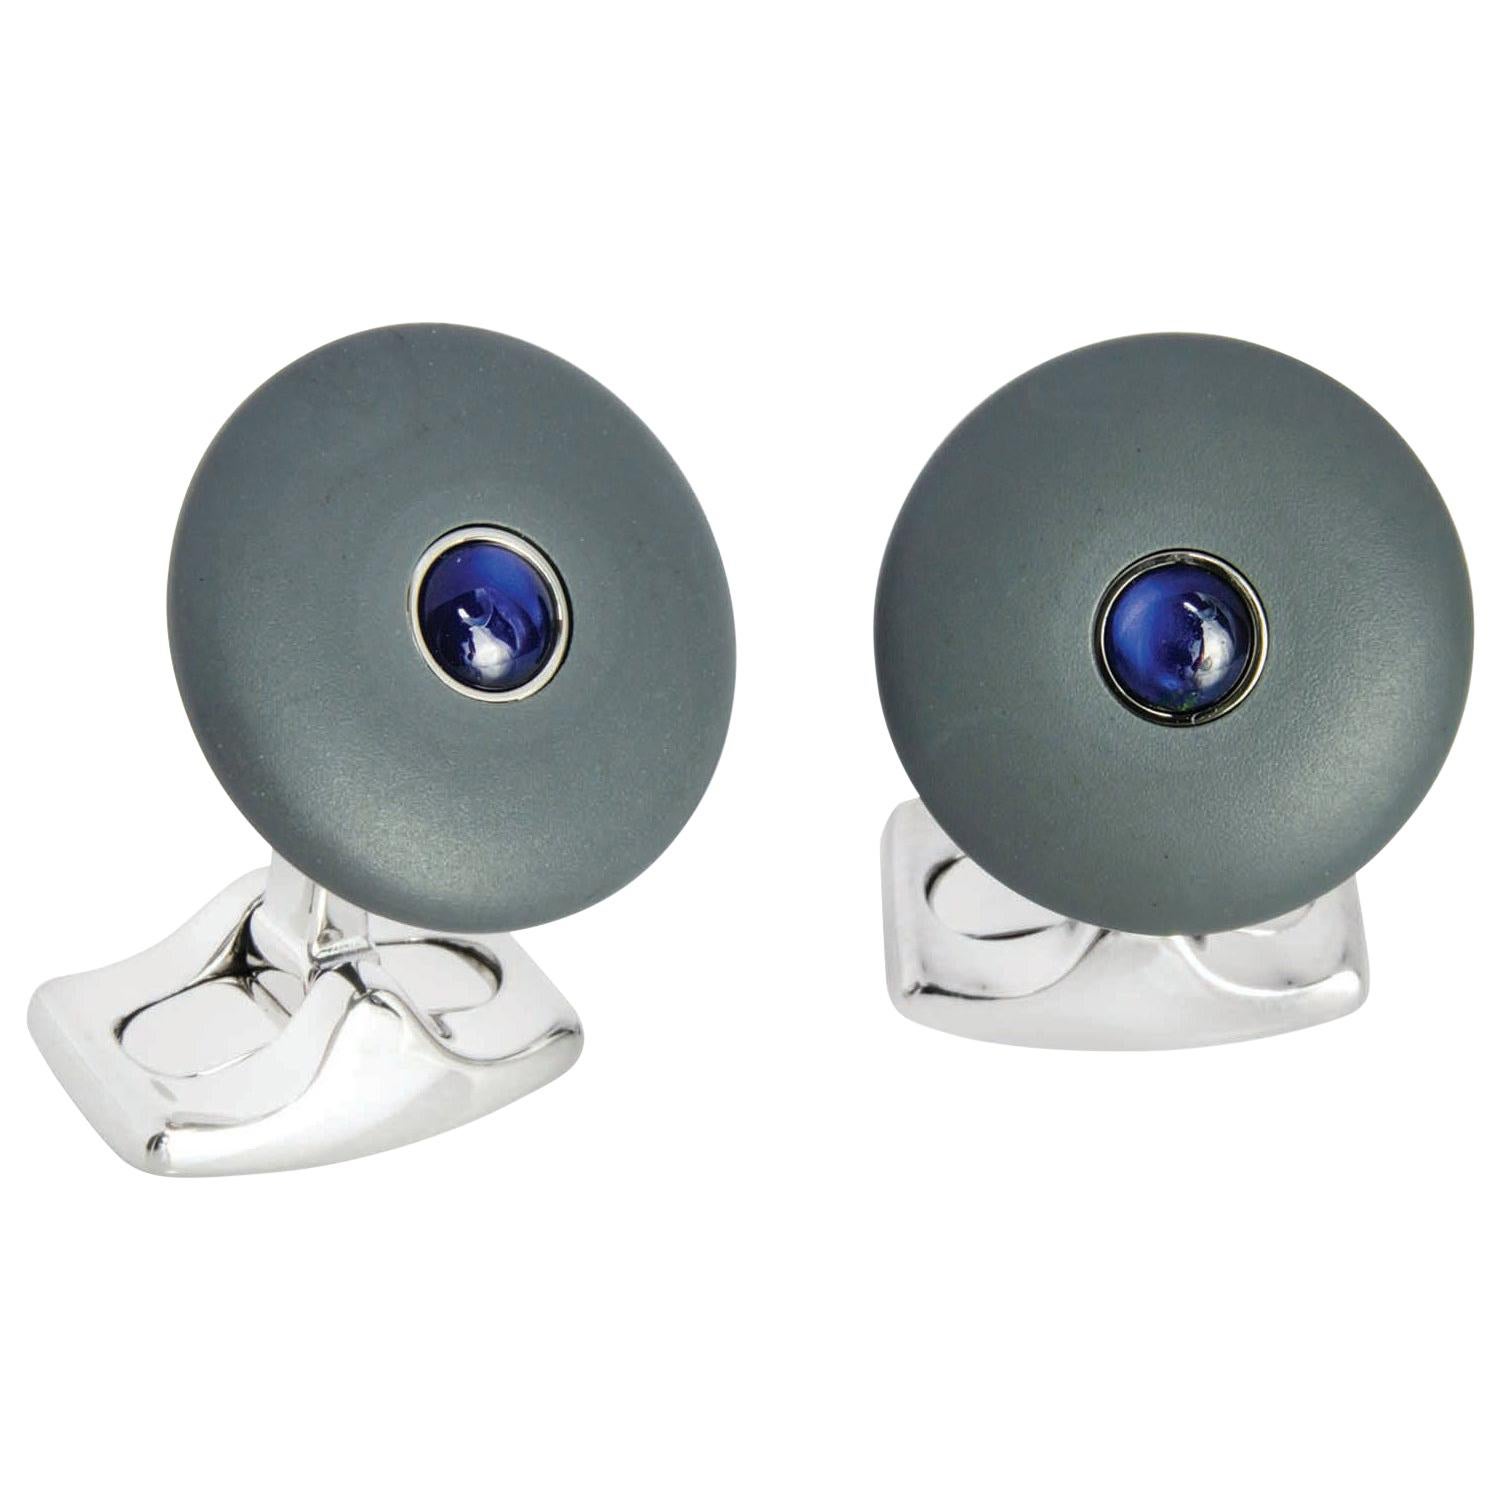 Deakin & Francis 'The Brights' Grey Round Cufflinks with Sapphire Centre For Sale